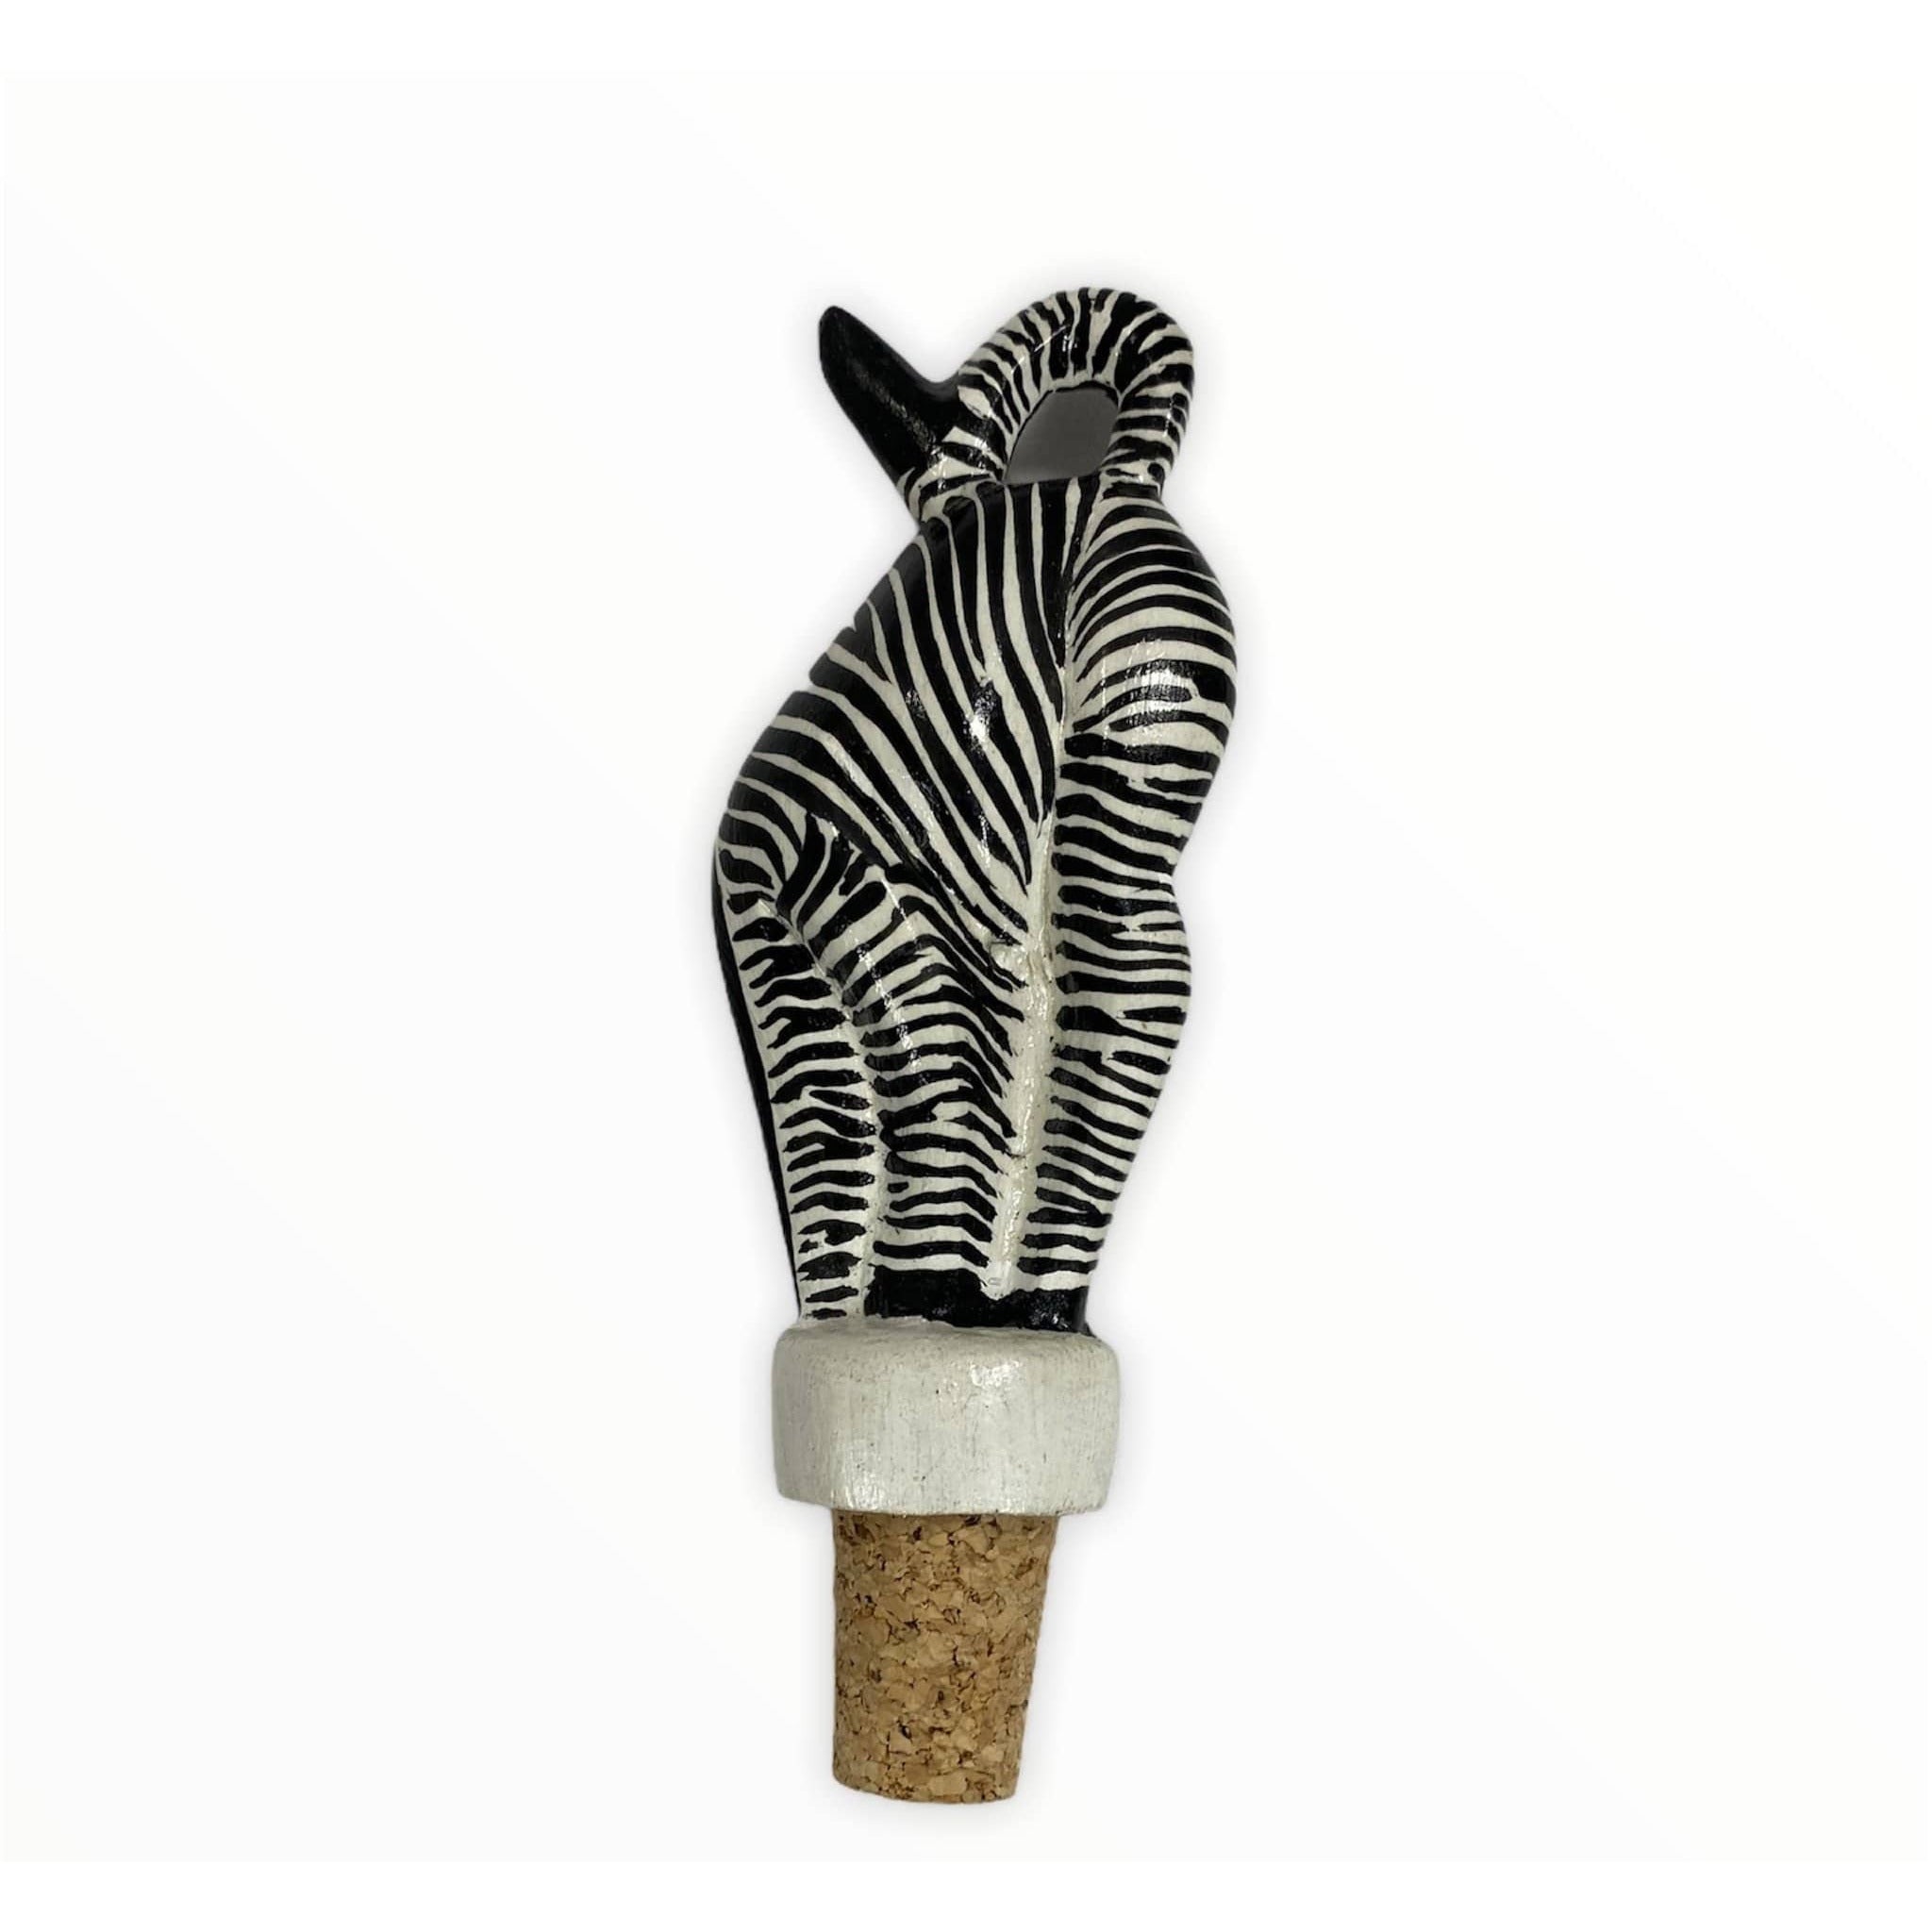 Tobmarc Home Decor & Gifts  Zebra Large Animal statue Personalized wine bottle stopper